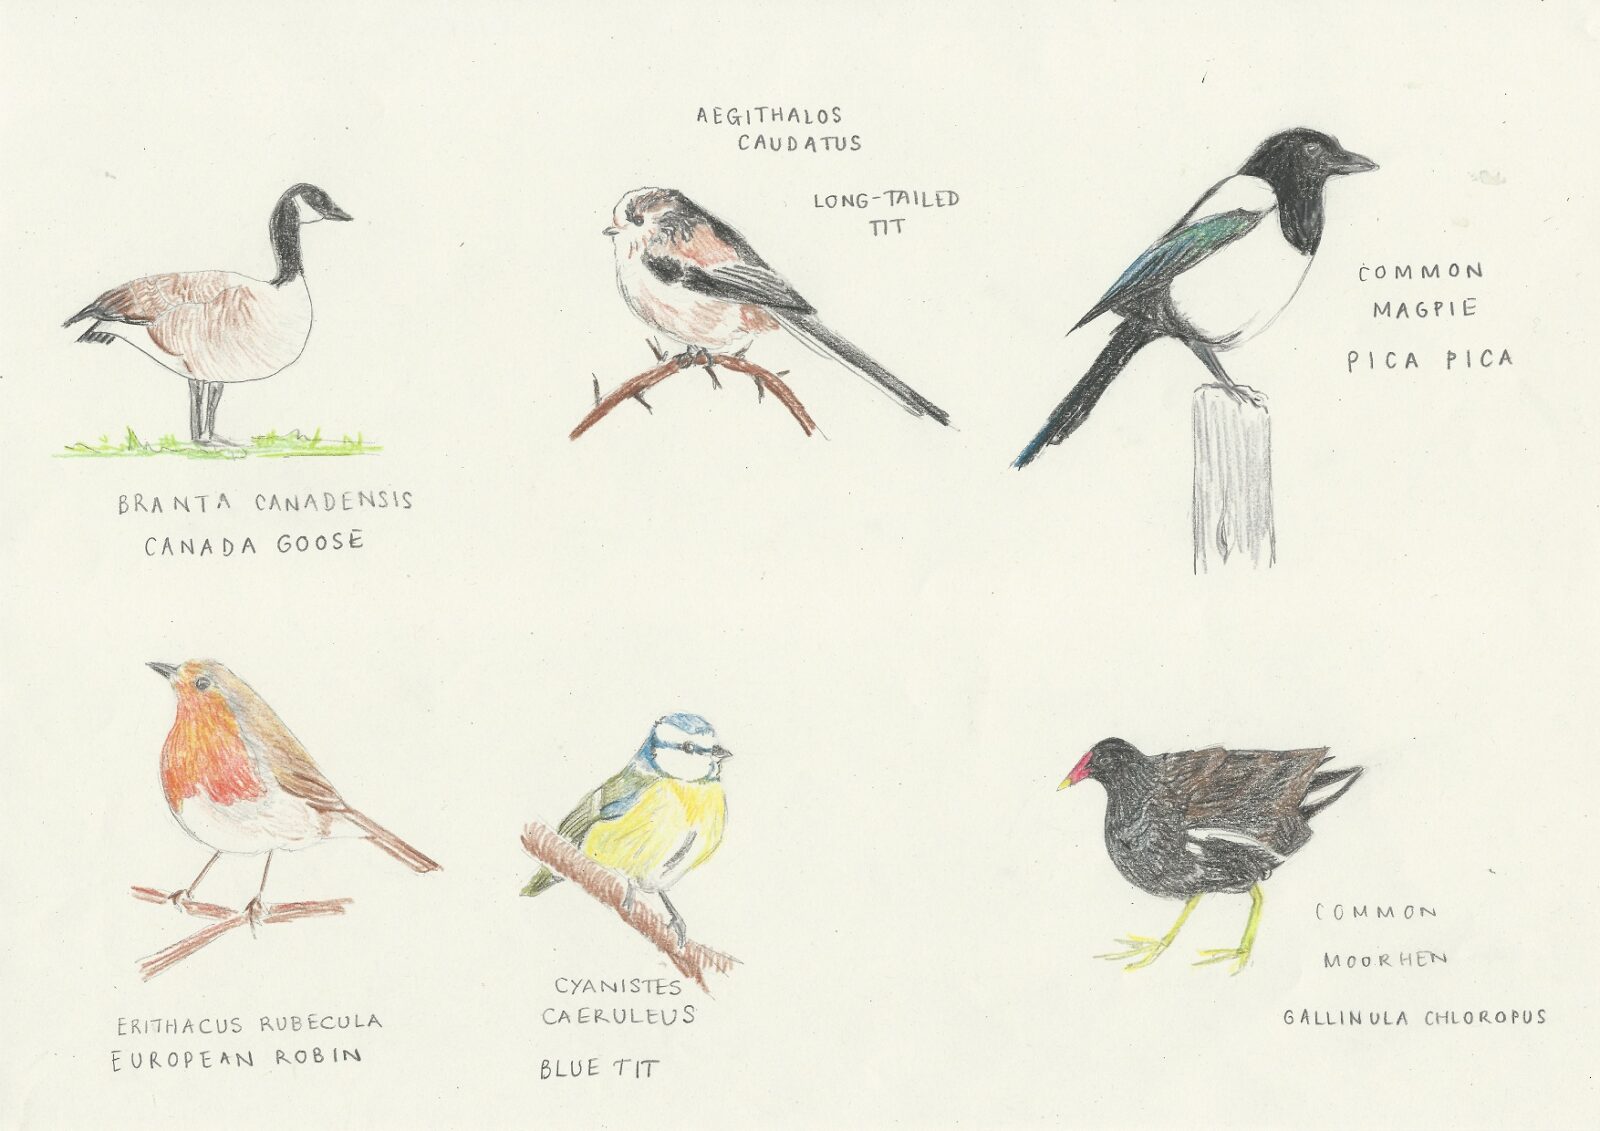 Coloured pencil drawings of a canada goose, long-tailed tit, magpie, blue tit and moorhen